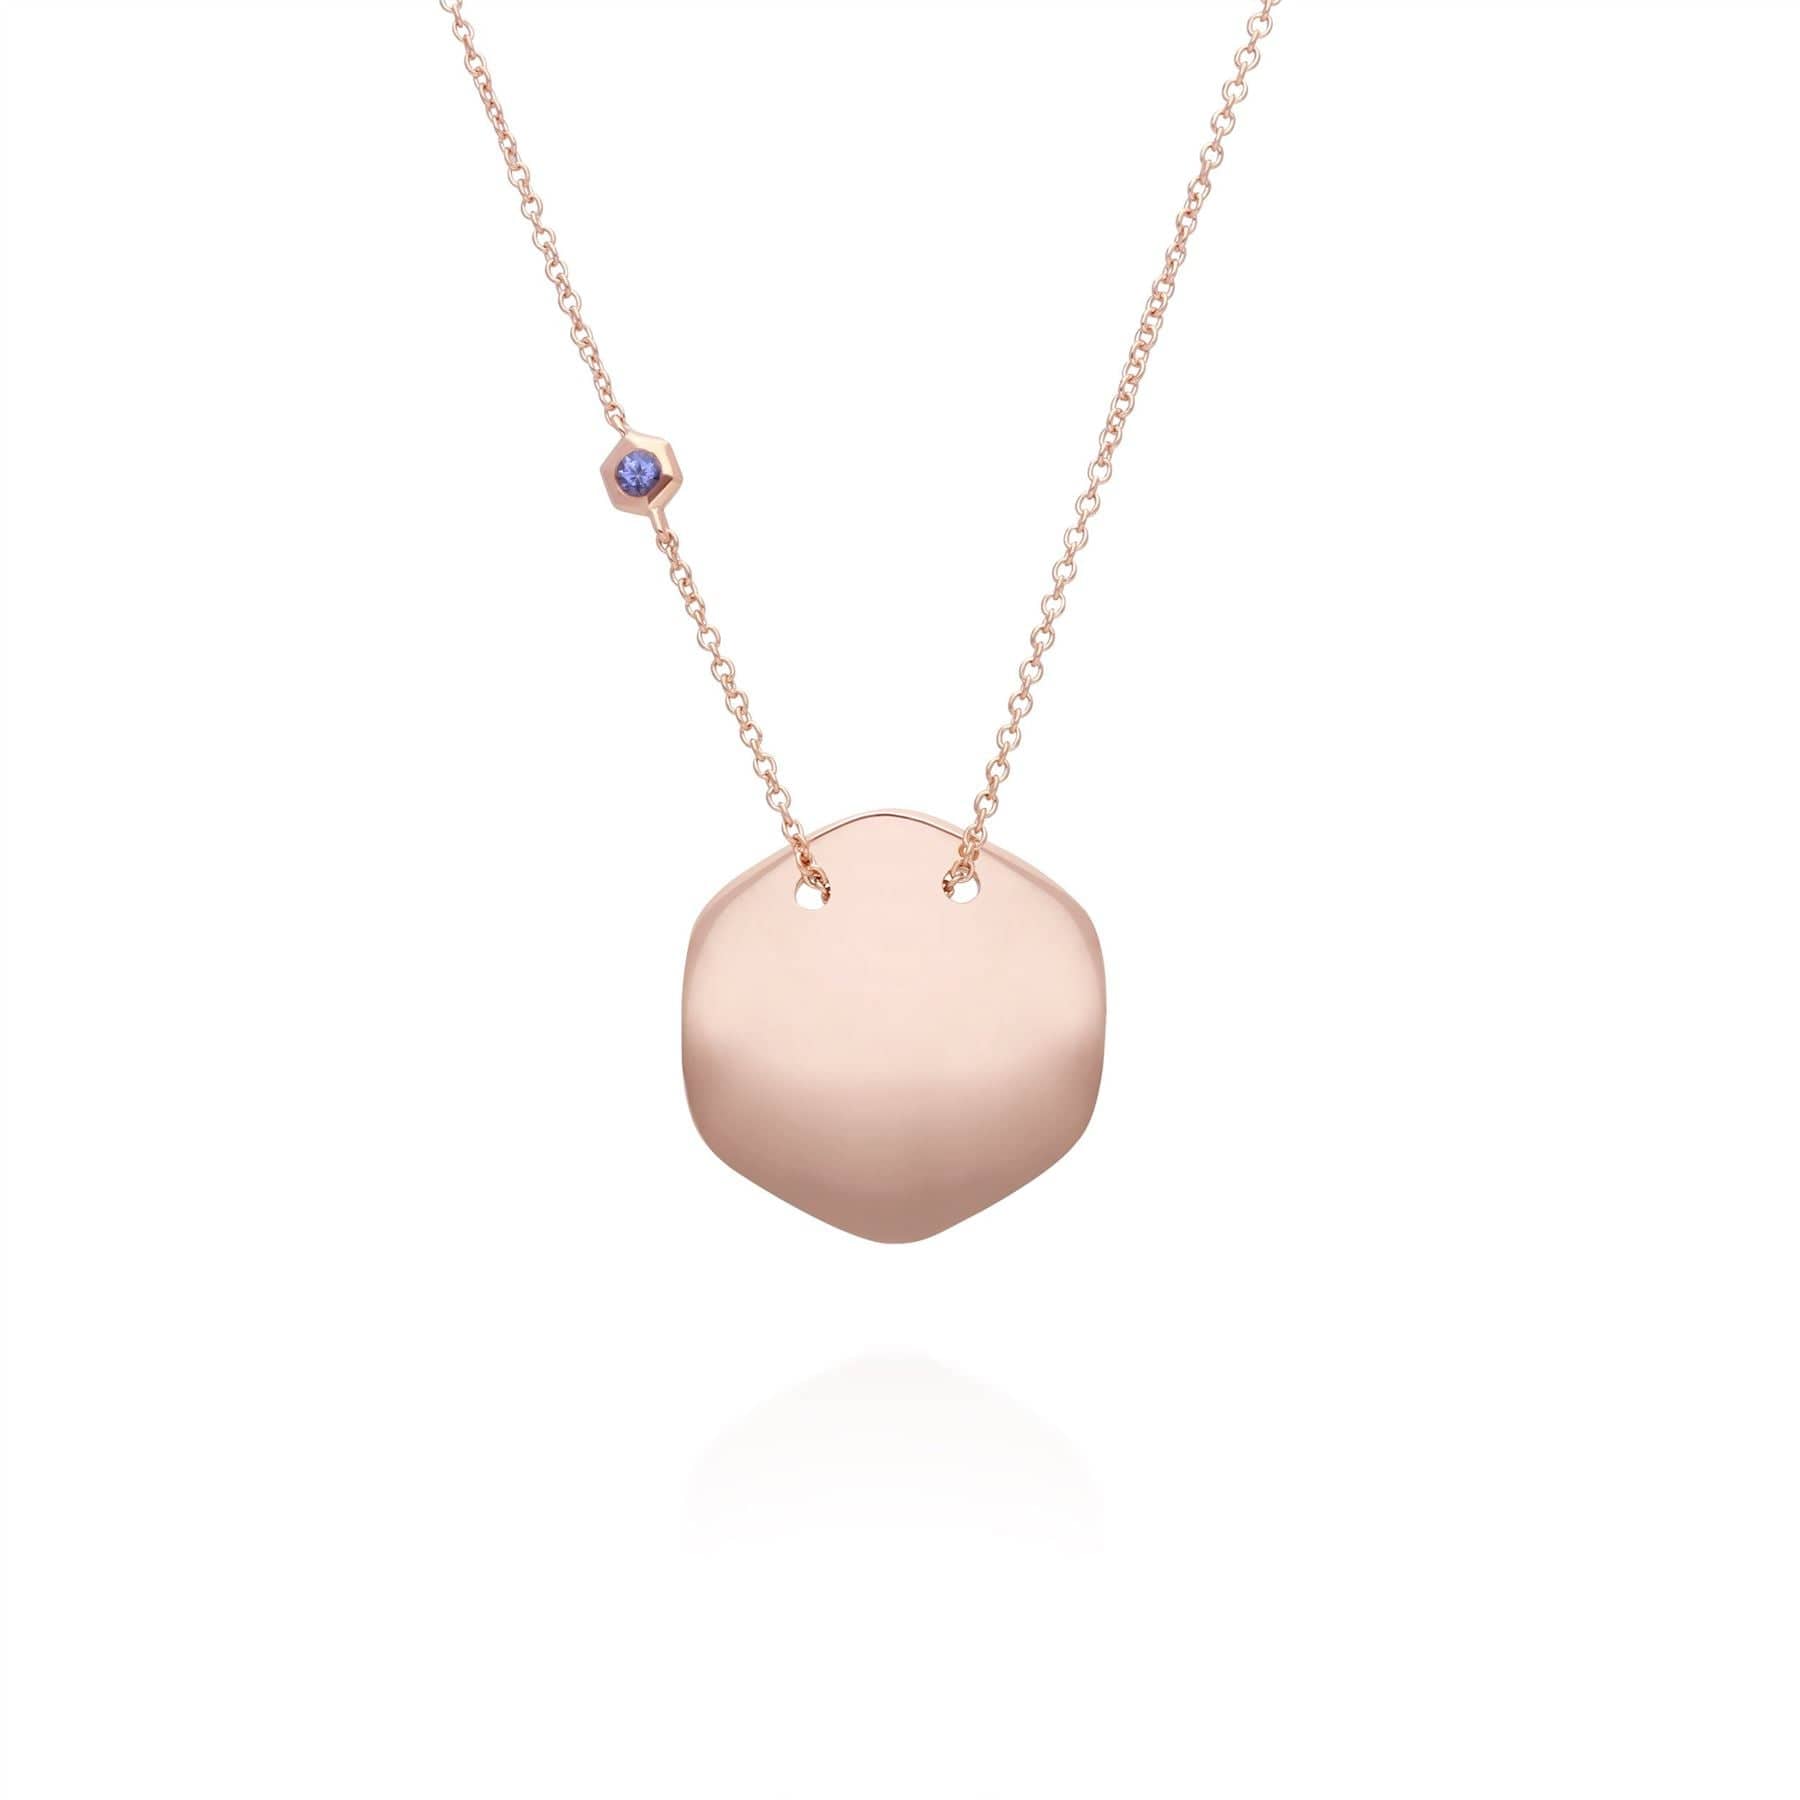 Tanzanite Engravable Necklace in Rose Gold Plated Sterling Silver - Gemondo